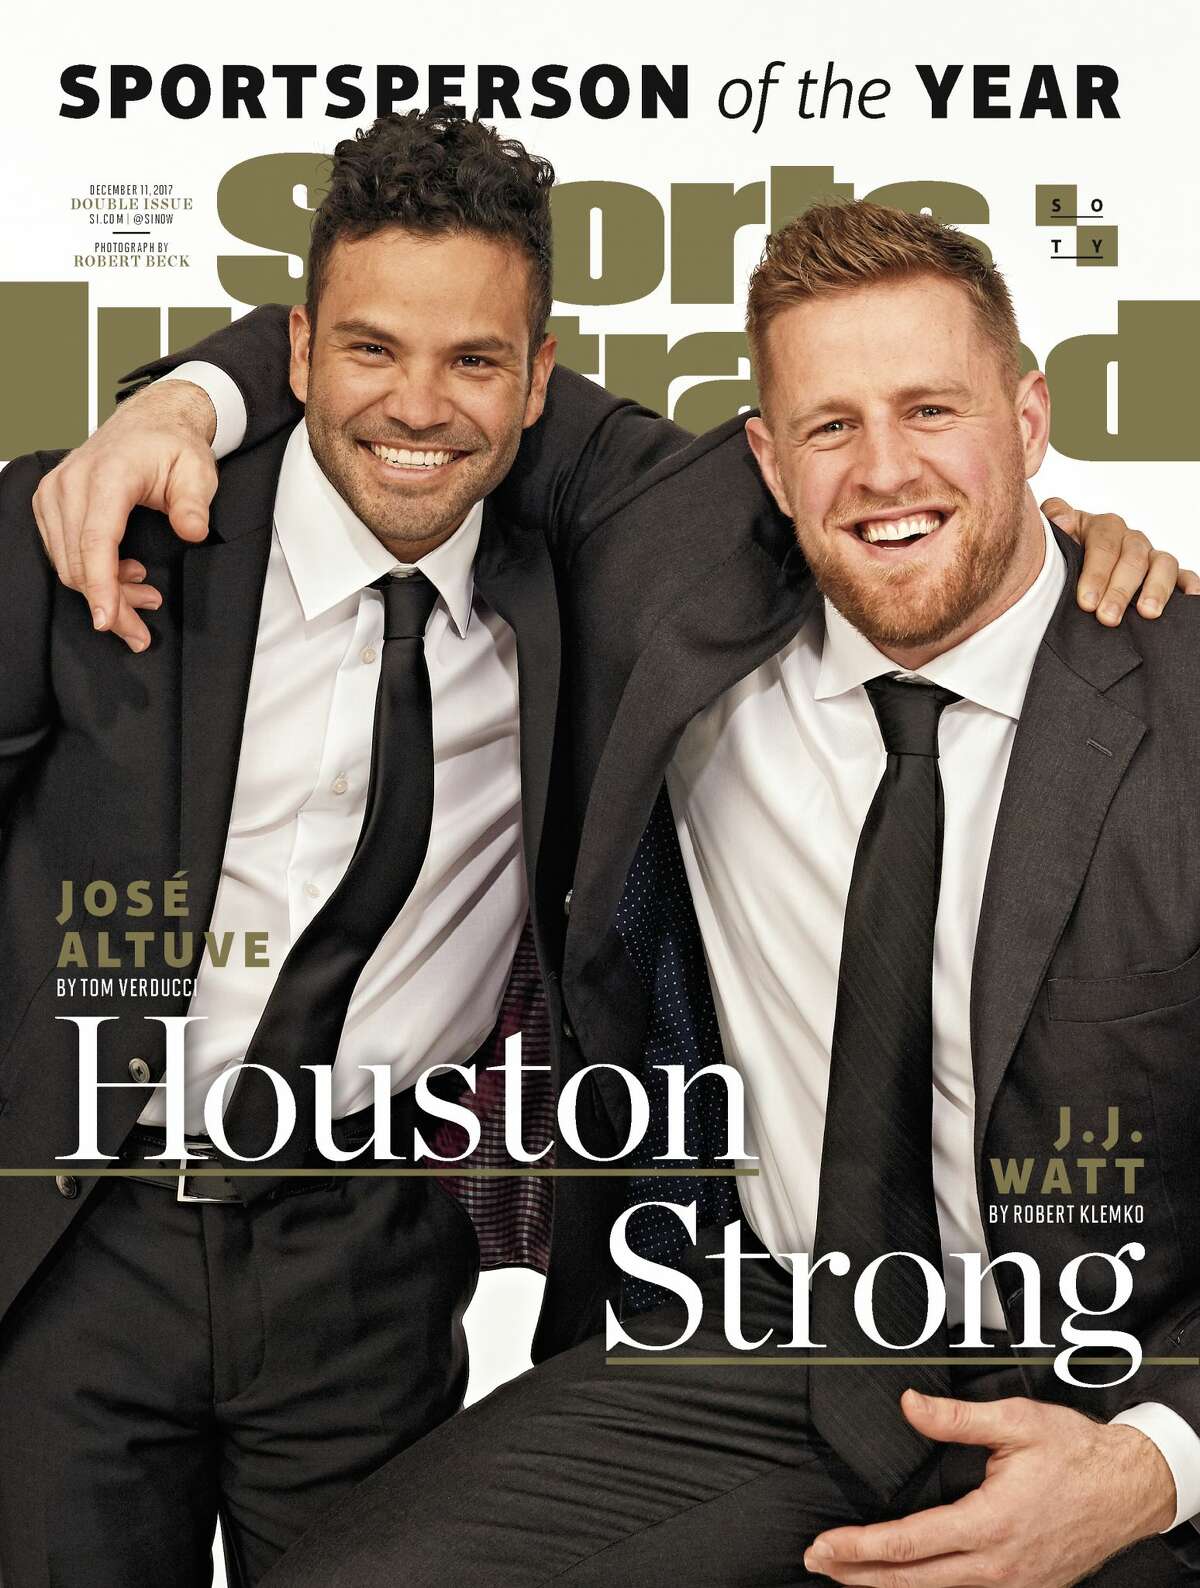 Sports Illustrated has named the Astros' J.J. Watt and the Texans' J.J. Watt as Sportspersons of the Year for 2017. The magazine will hit newsstands later this month.